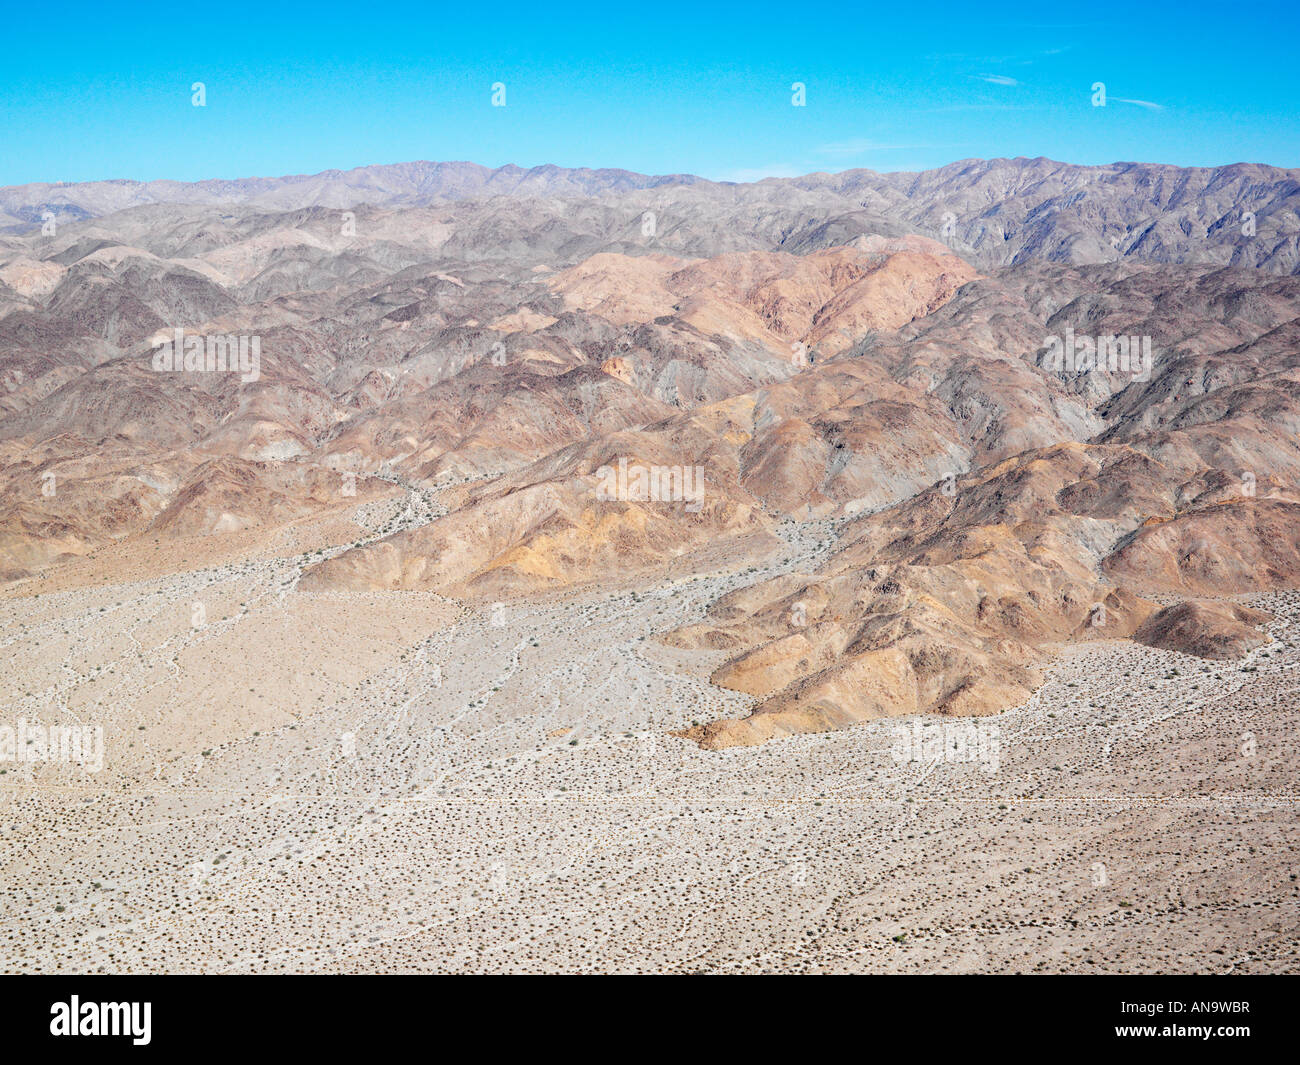 Aerial veiw of remote California desert with mountain range in background Stock Photo